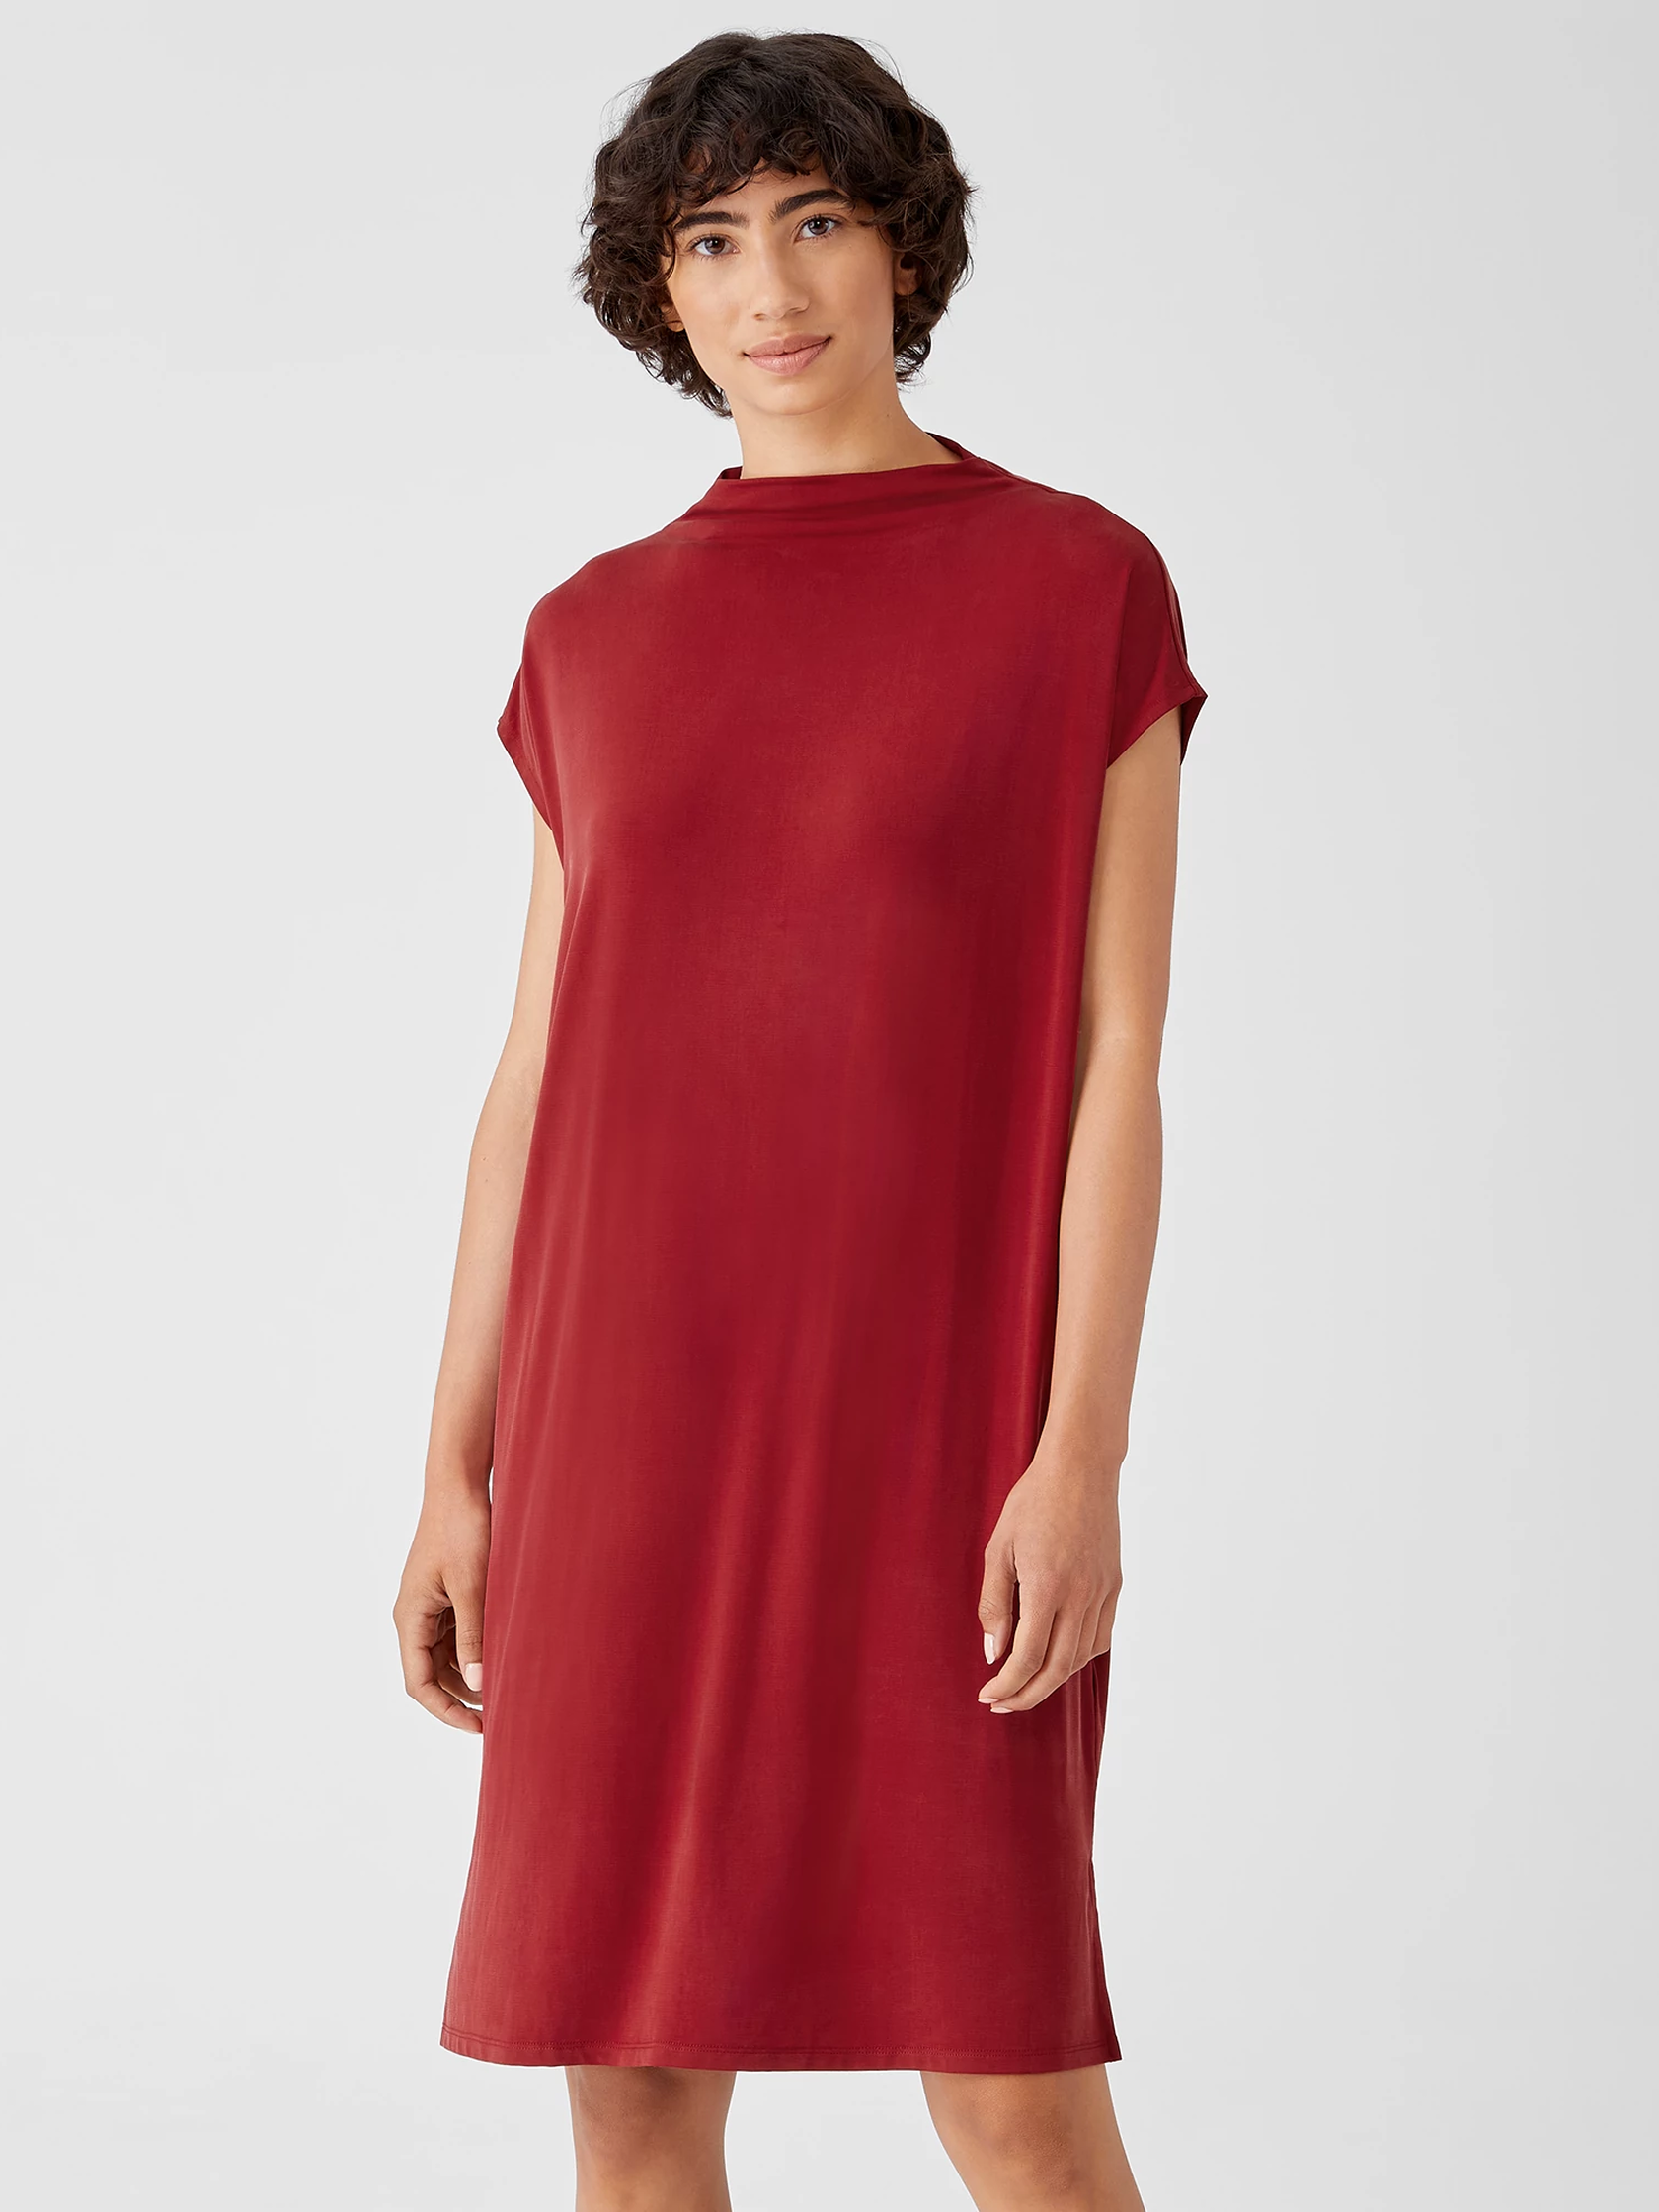 Sueded Cupro Knit Funnel Neck Dress